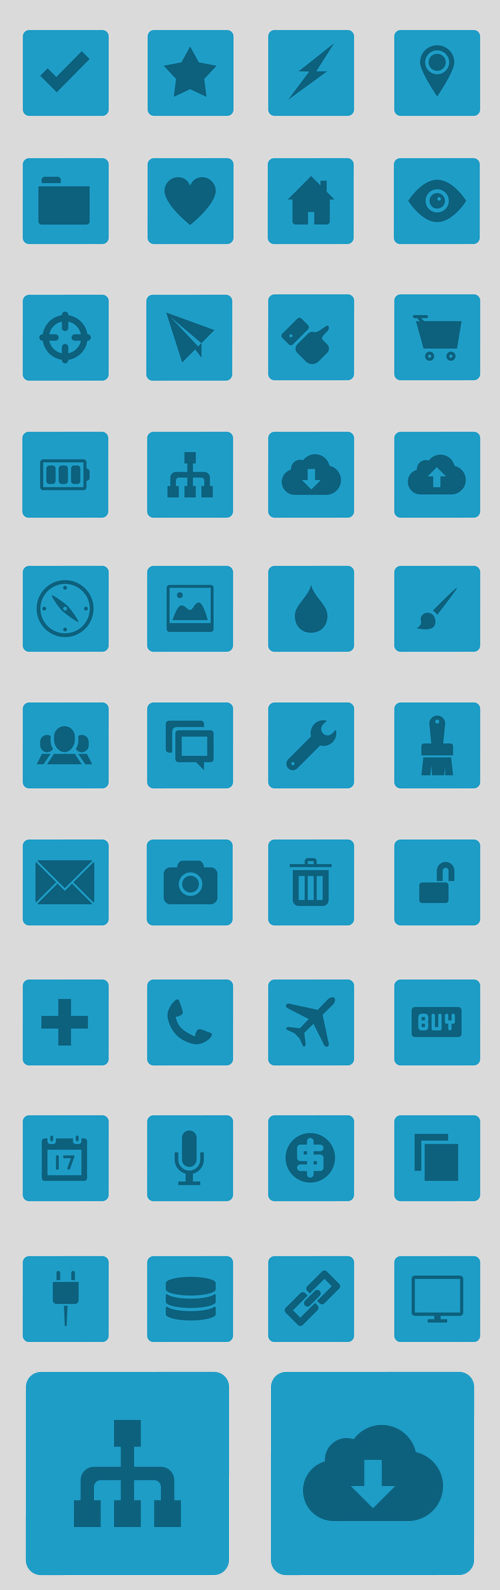 UI Icons (4 different styles) (40 Icons)